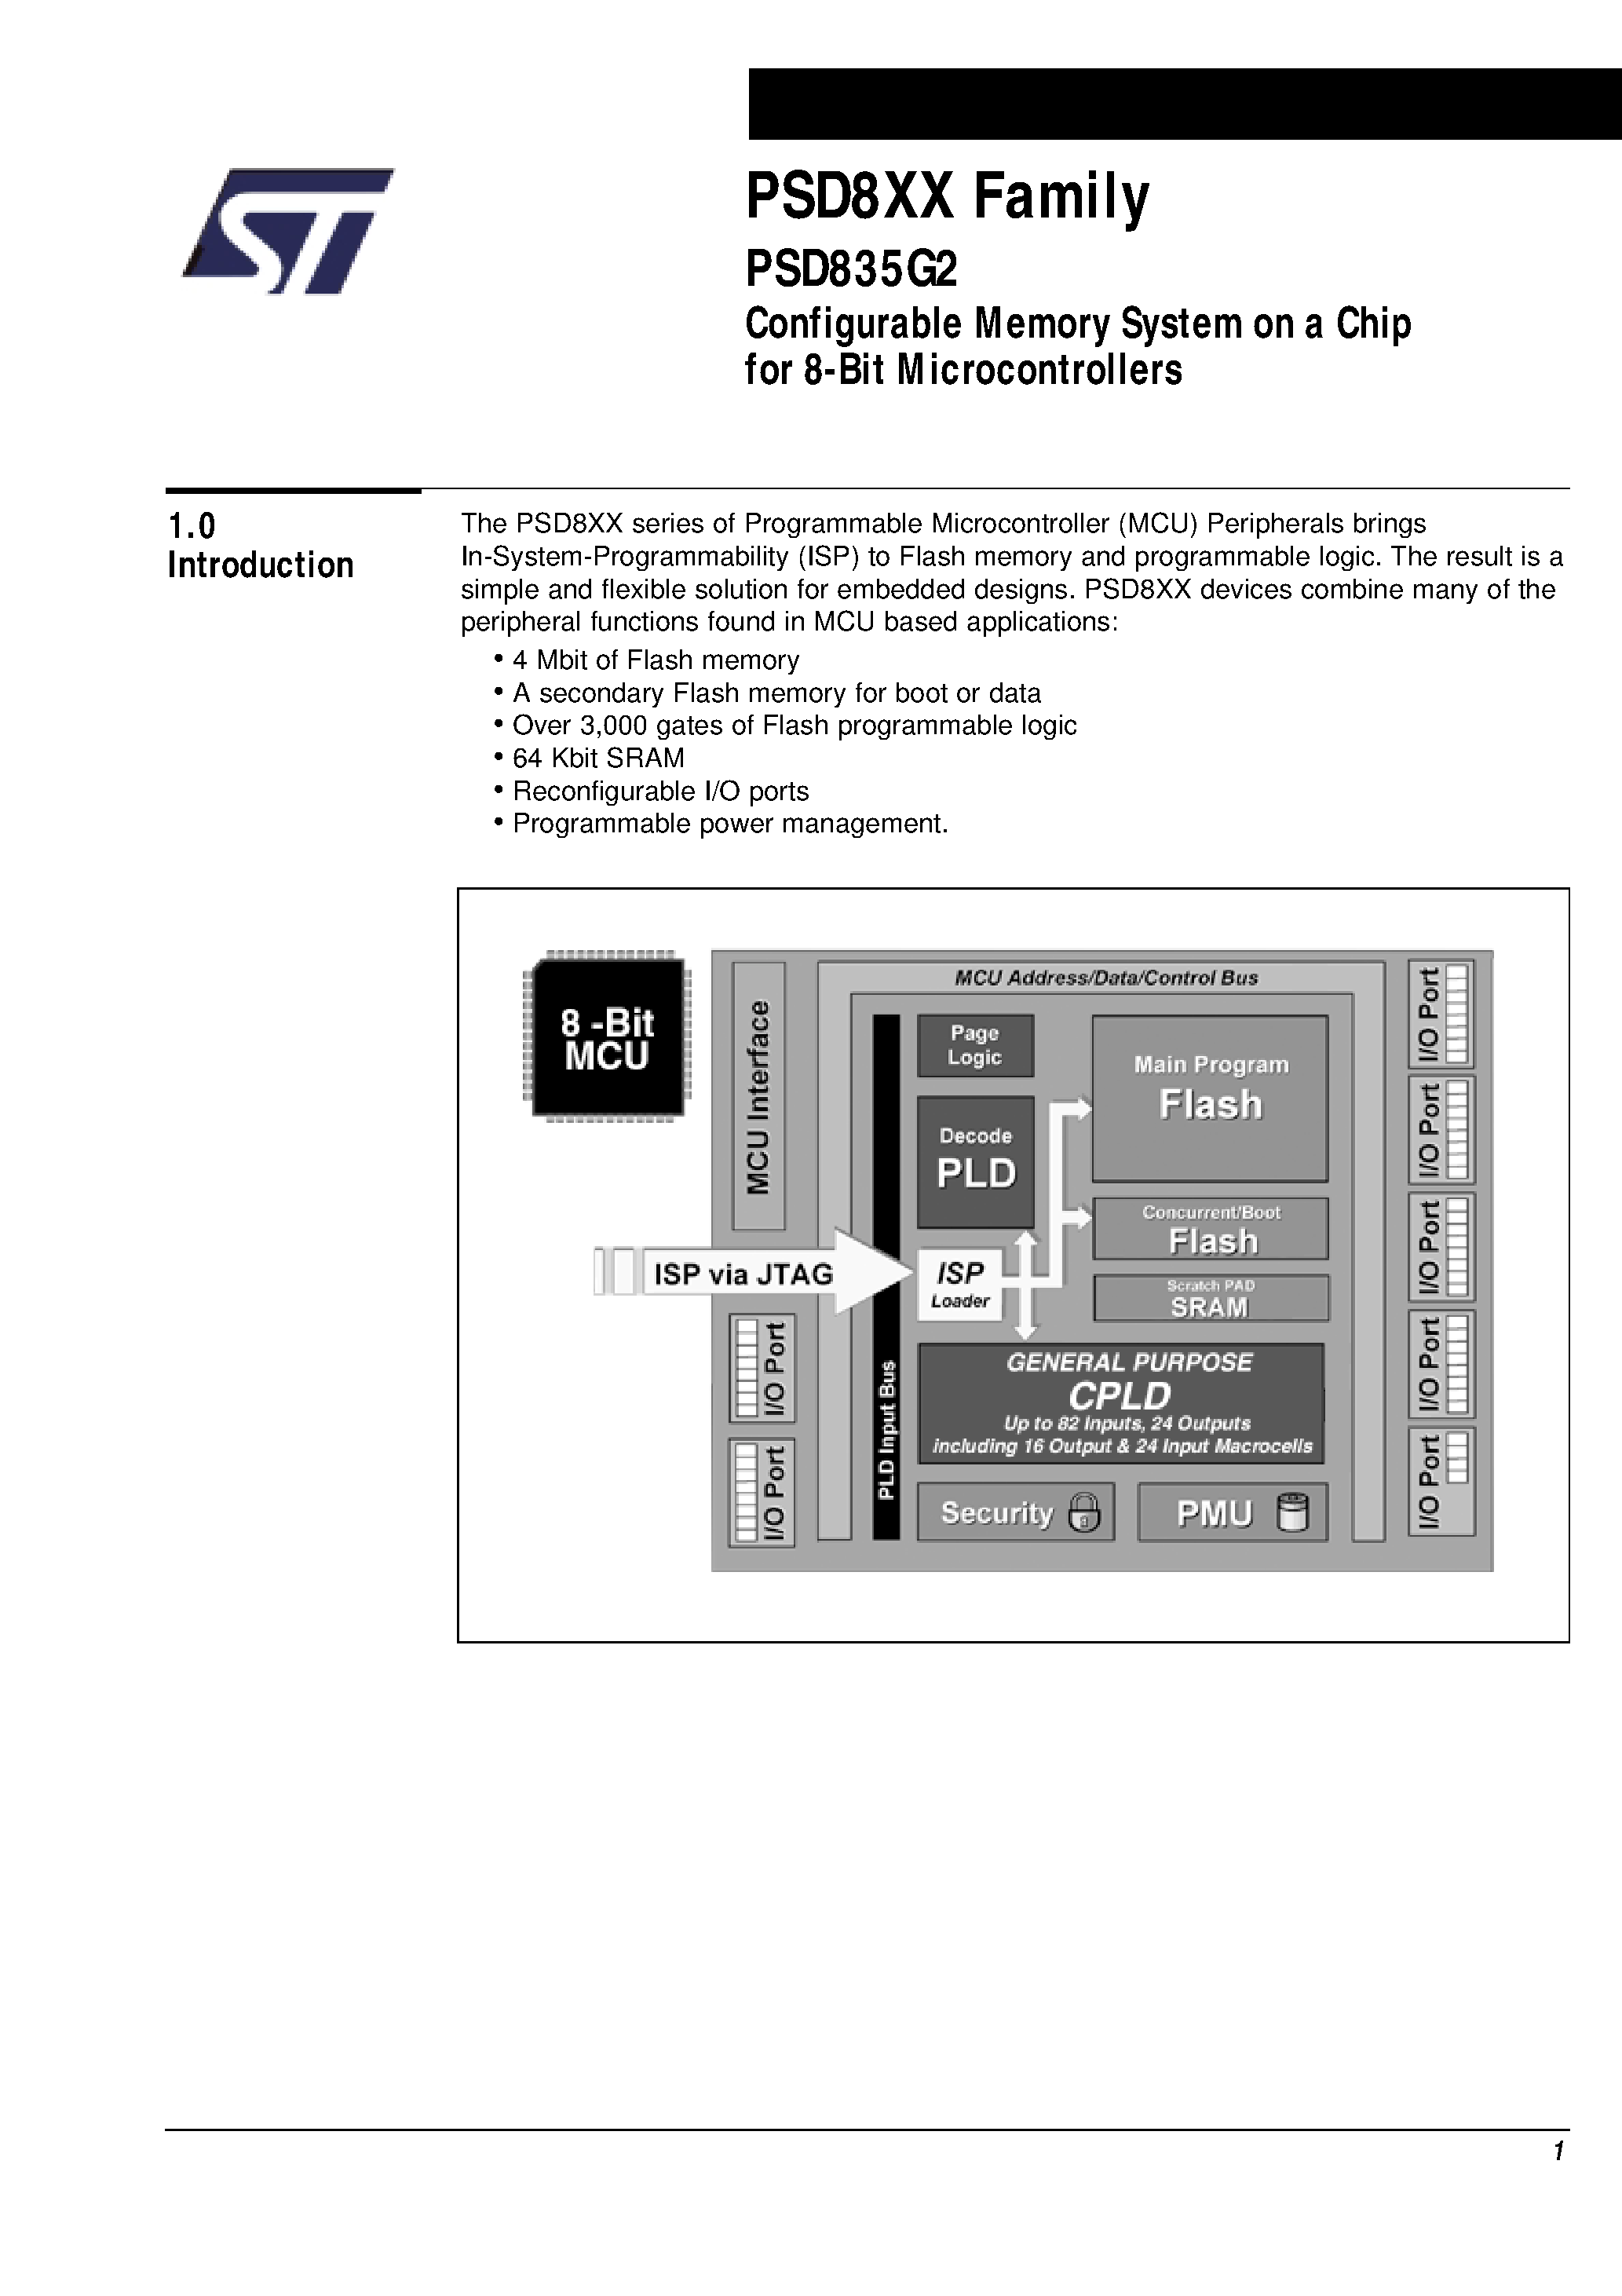 Datasheet PSD835F1V-A-70U - Configurable Memory System on a Chip for 8-Bit Microcontrollers page 2